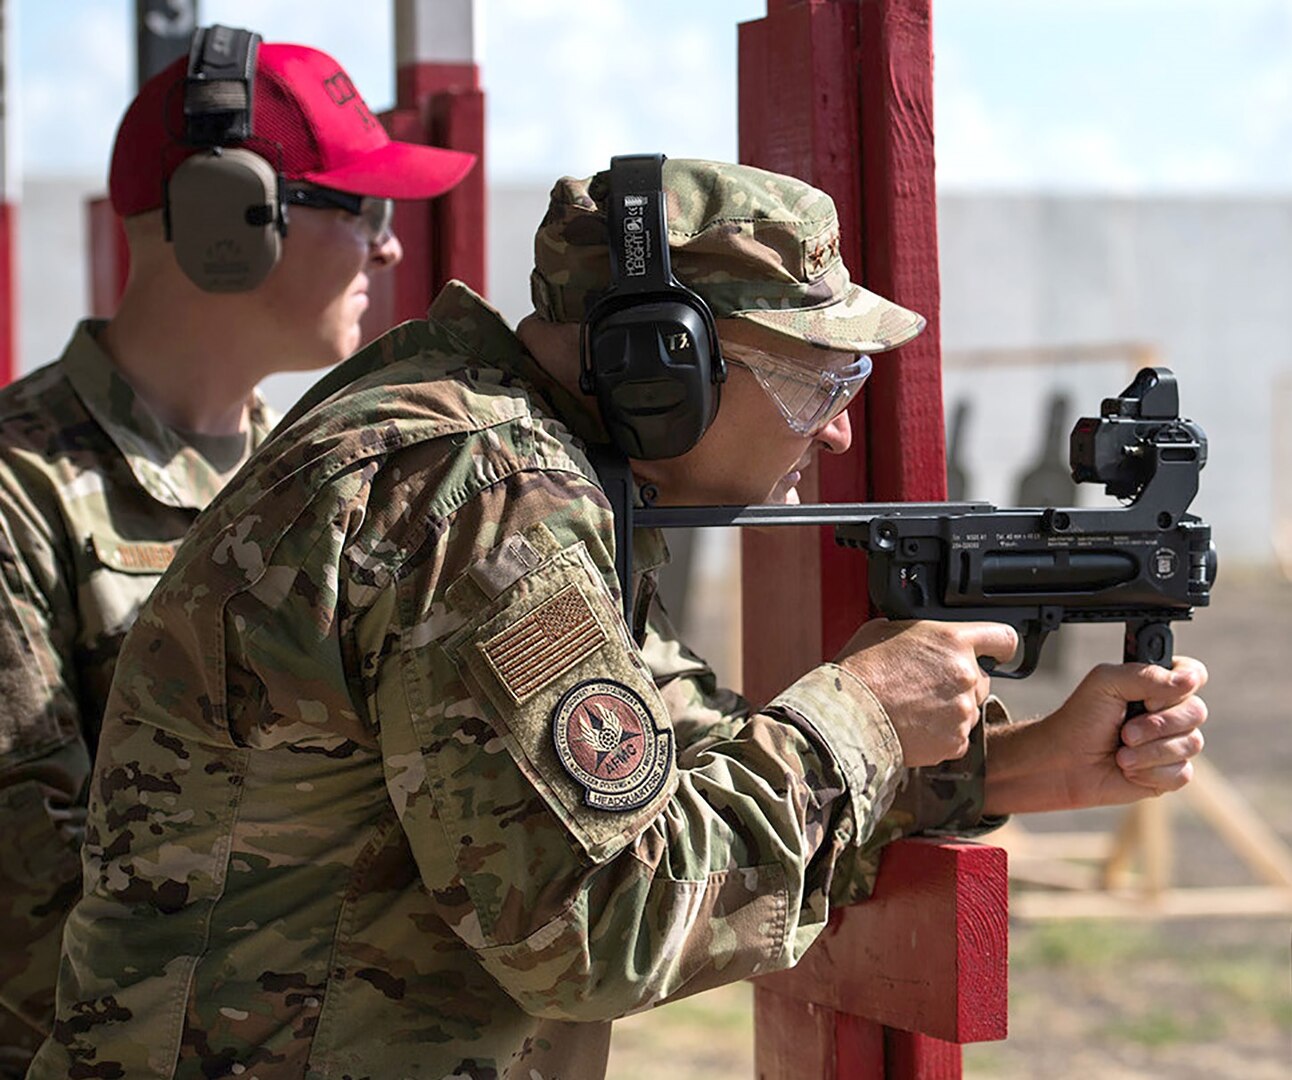 Gen. Arnold W. Bunch, Jr., fires the M320A1 grenade launcher with the ballistic sighting module aiming device with guidance from Staff Sgt. Brett Miner, 37th Training Support Squadron combat arms instructor, at Medina range during his visit to Air Force Materiel Command Units at Joint Base San Antonio Sept. 4.